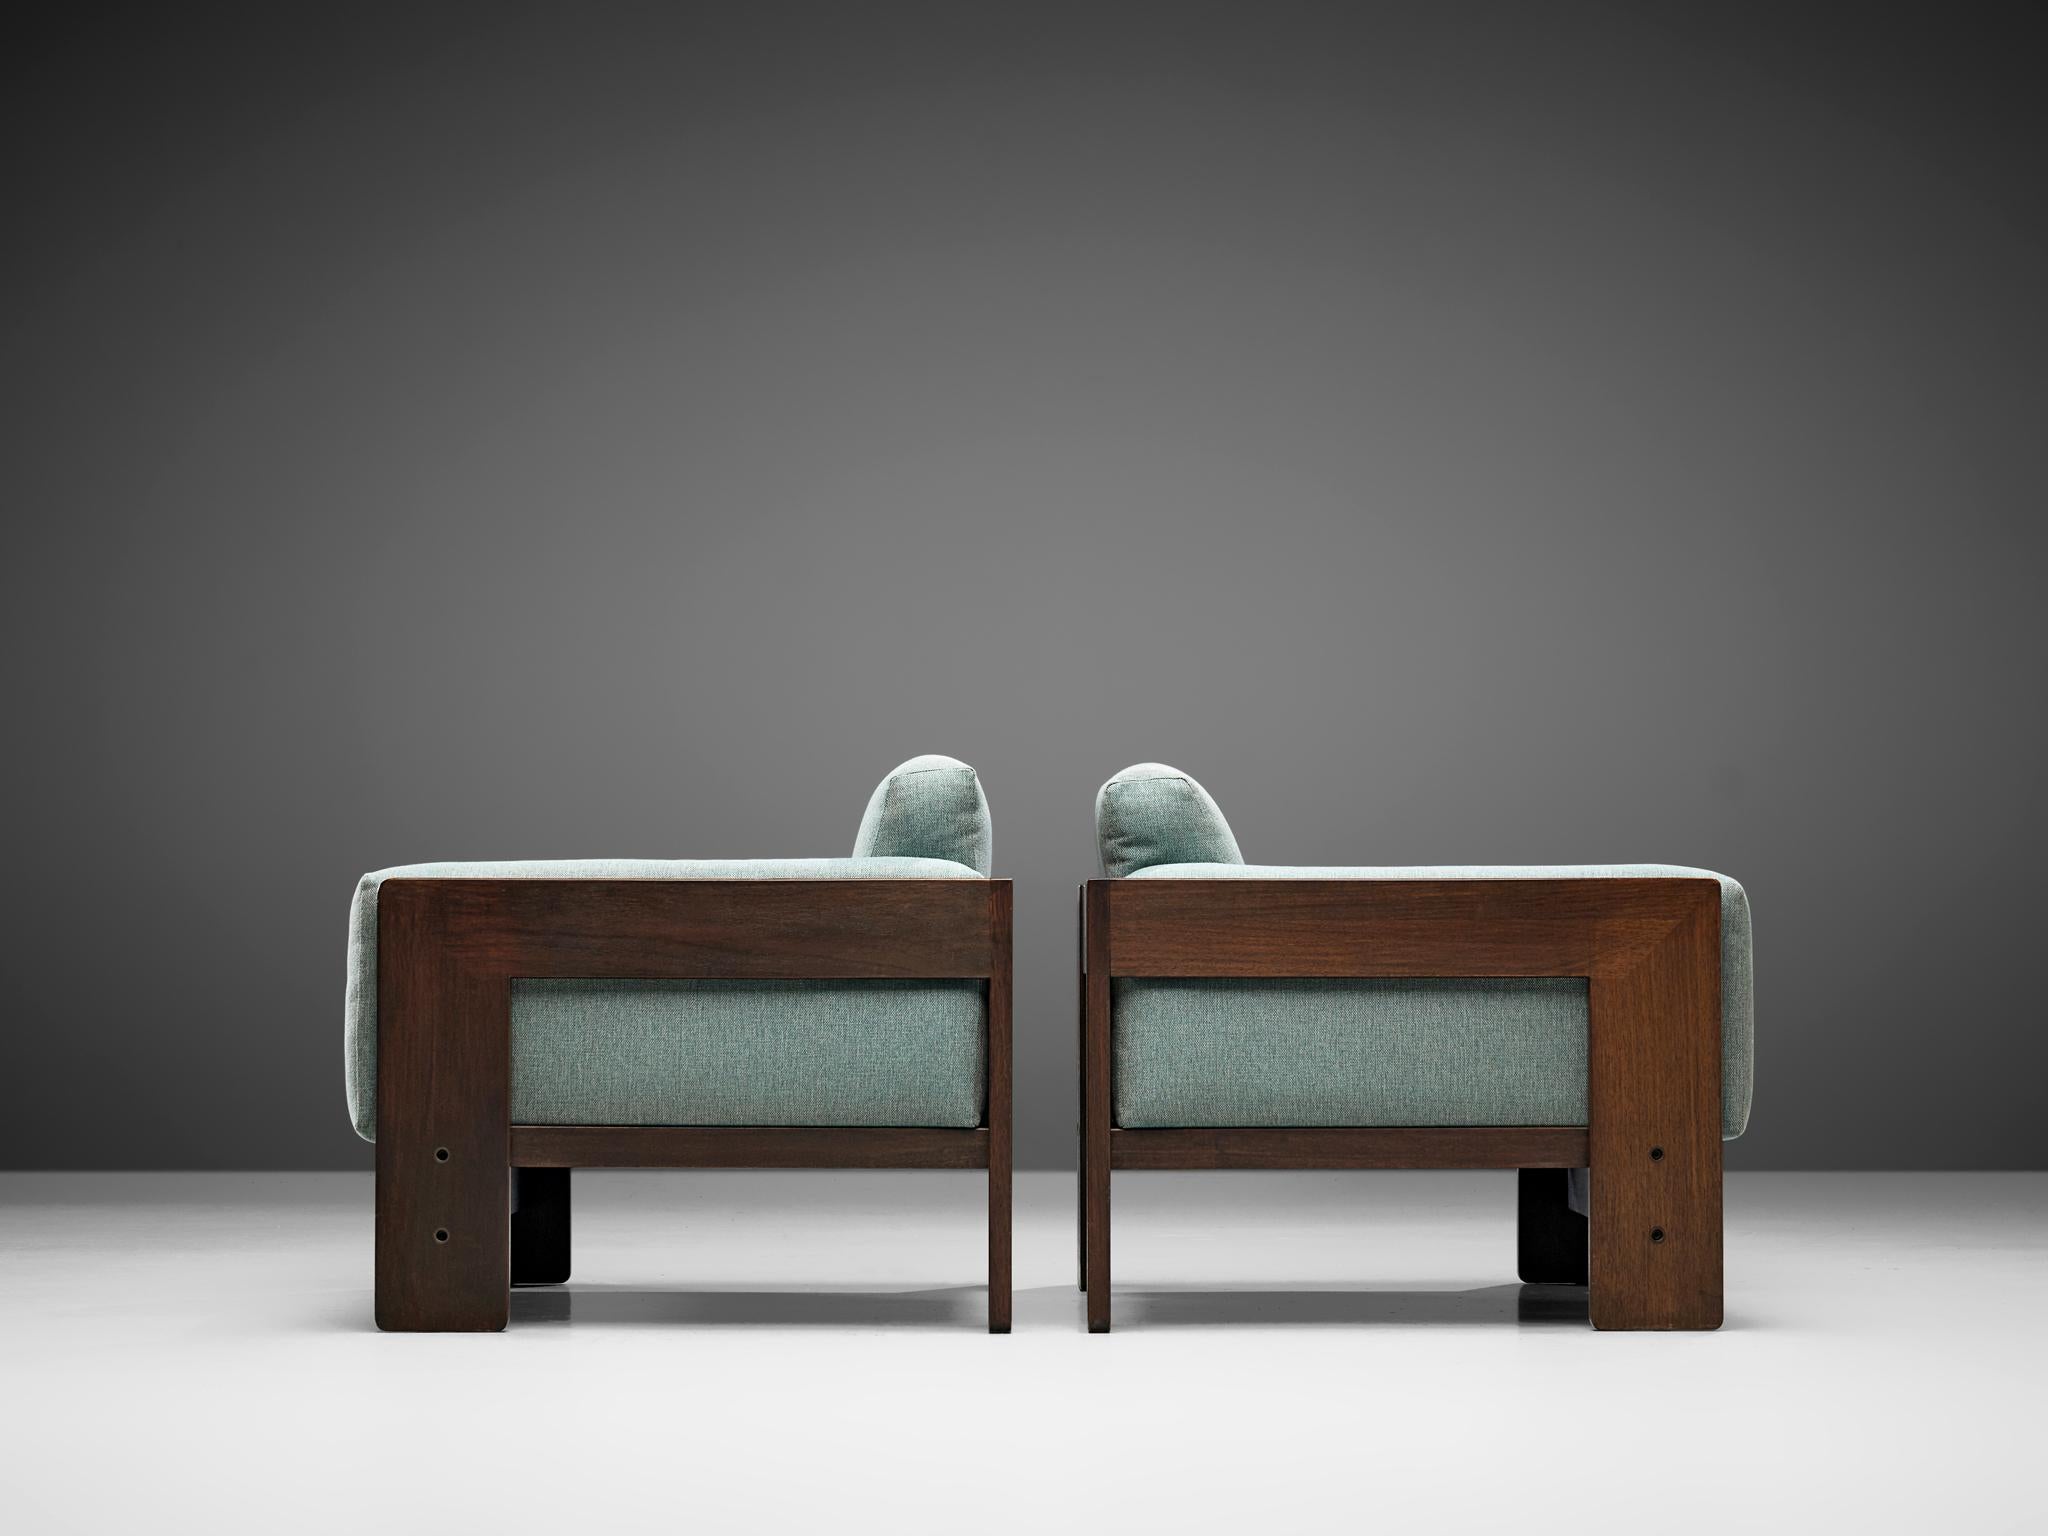 Italian Tobia Scarpa Pair of 'Bastiano' Lounge Chairs with Light Turquoise Upholstery